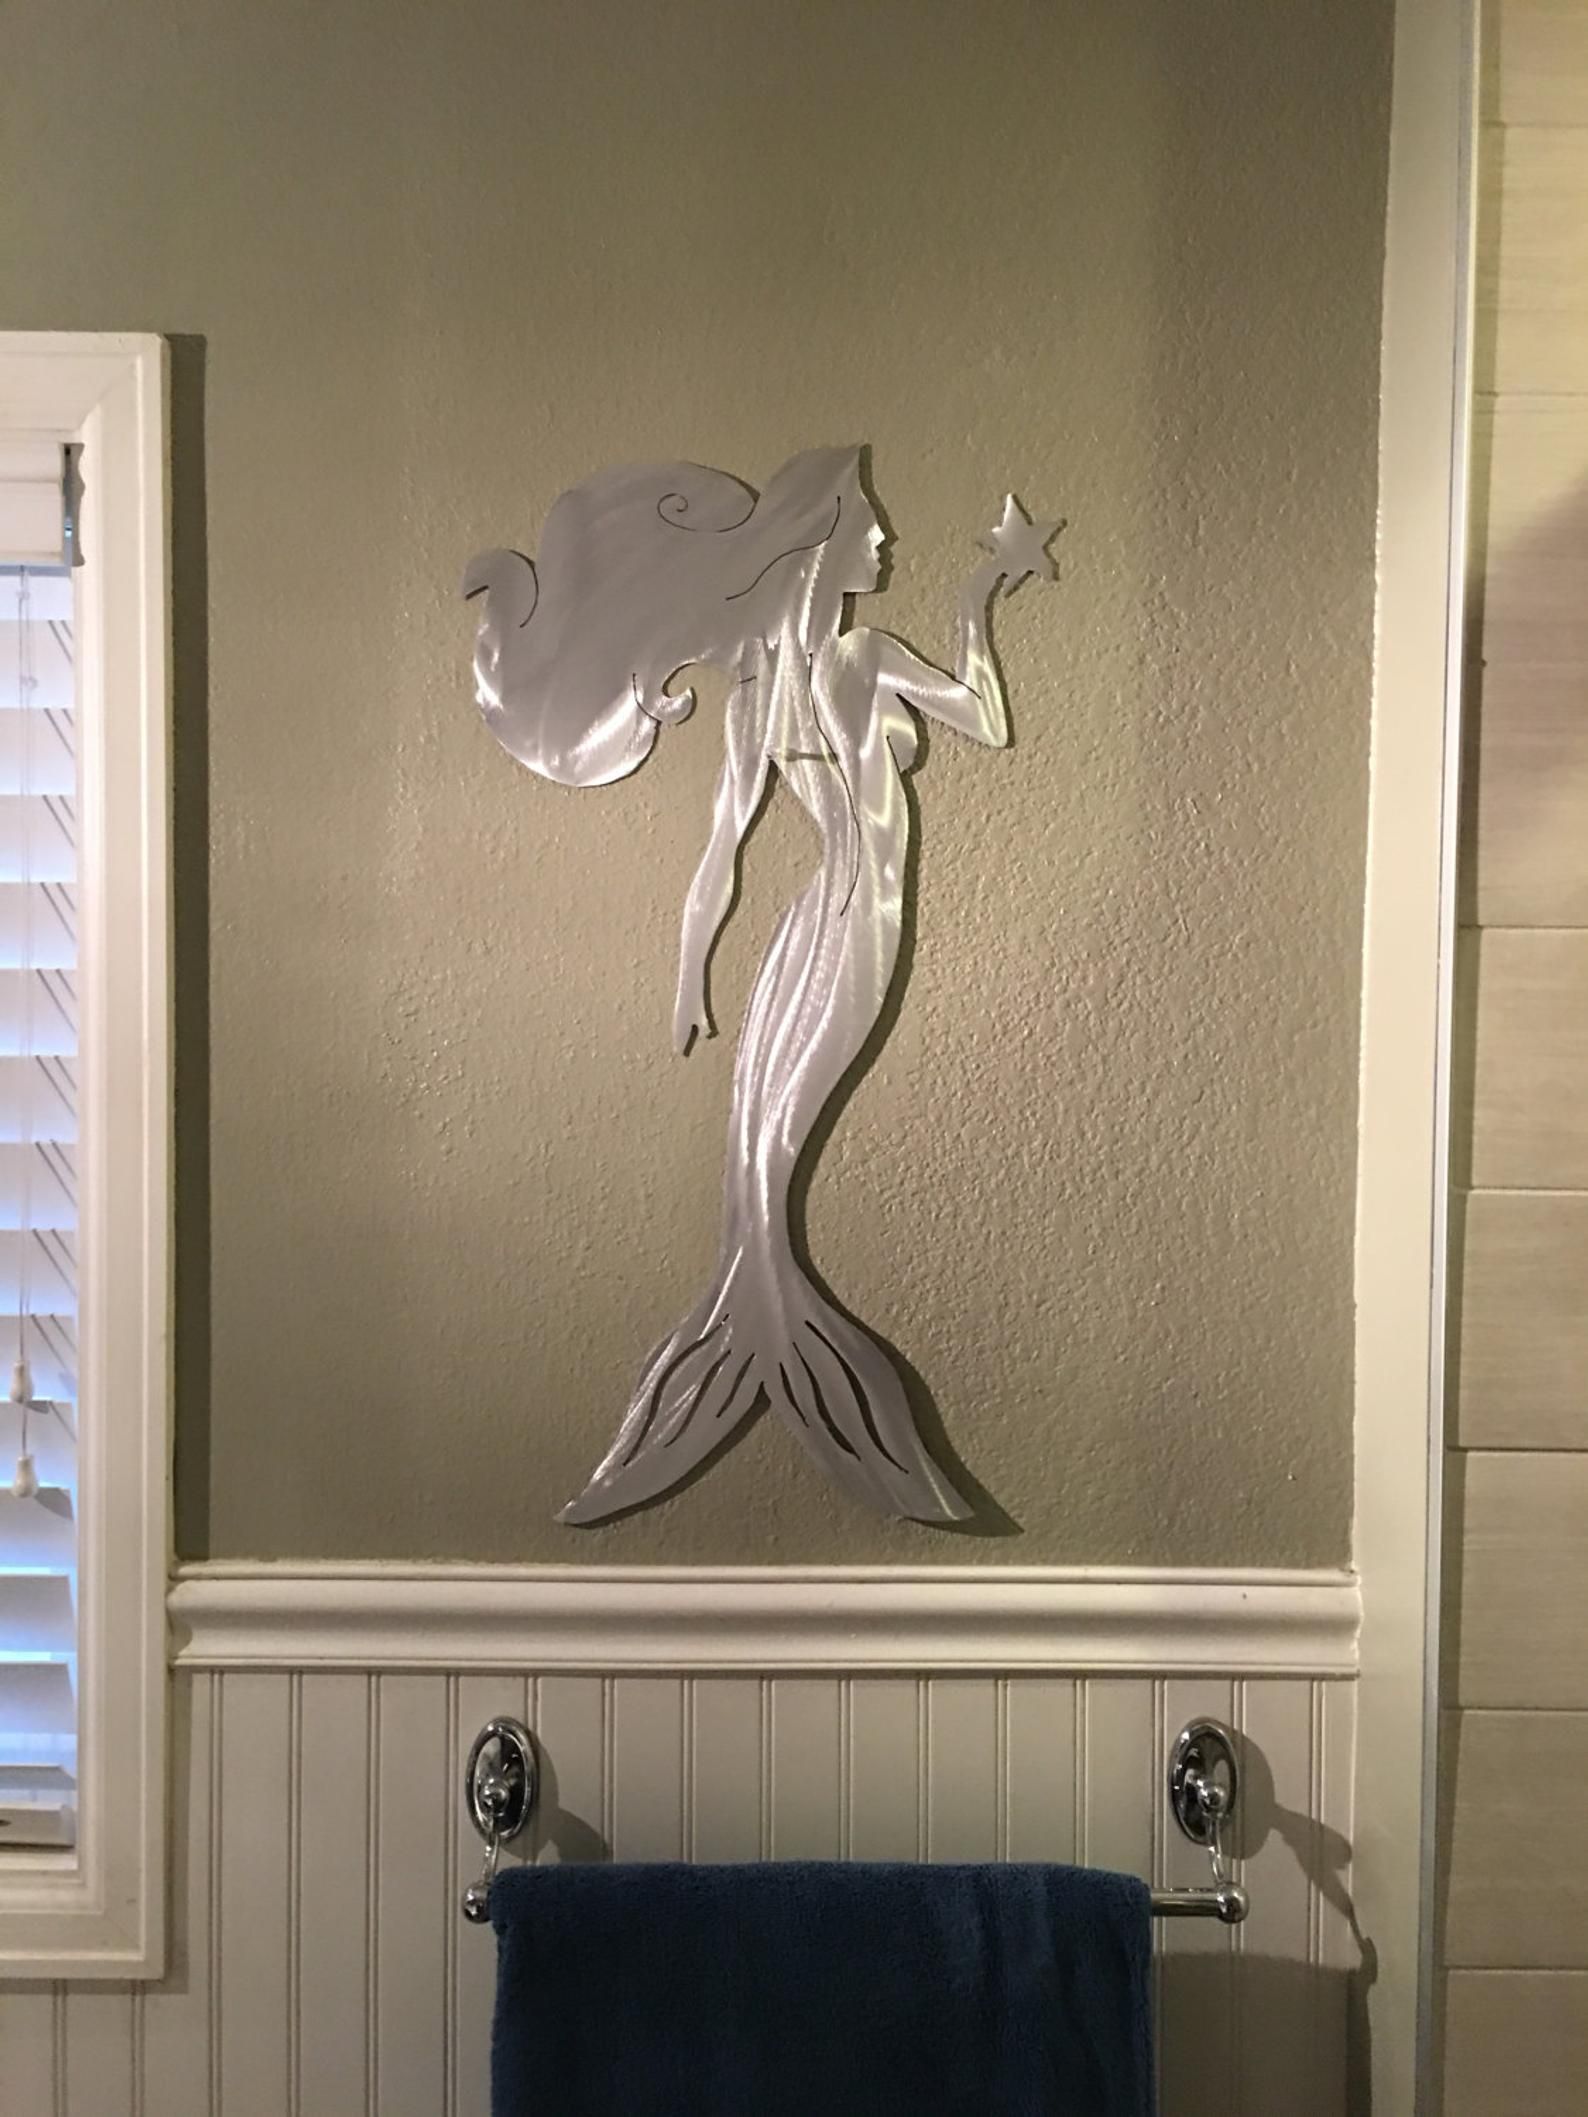 Mermaid Marine Human Fish Metal Wall Art Ocean Folklore Mythical Pertaining To Most Recently Released Sand And Sea Metal Wall Art (View 11 of 20)